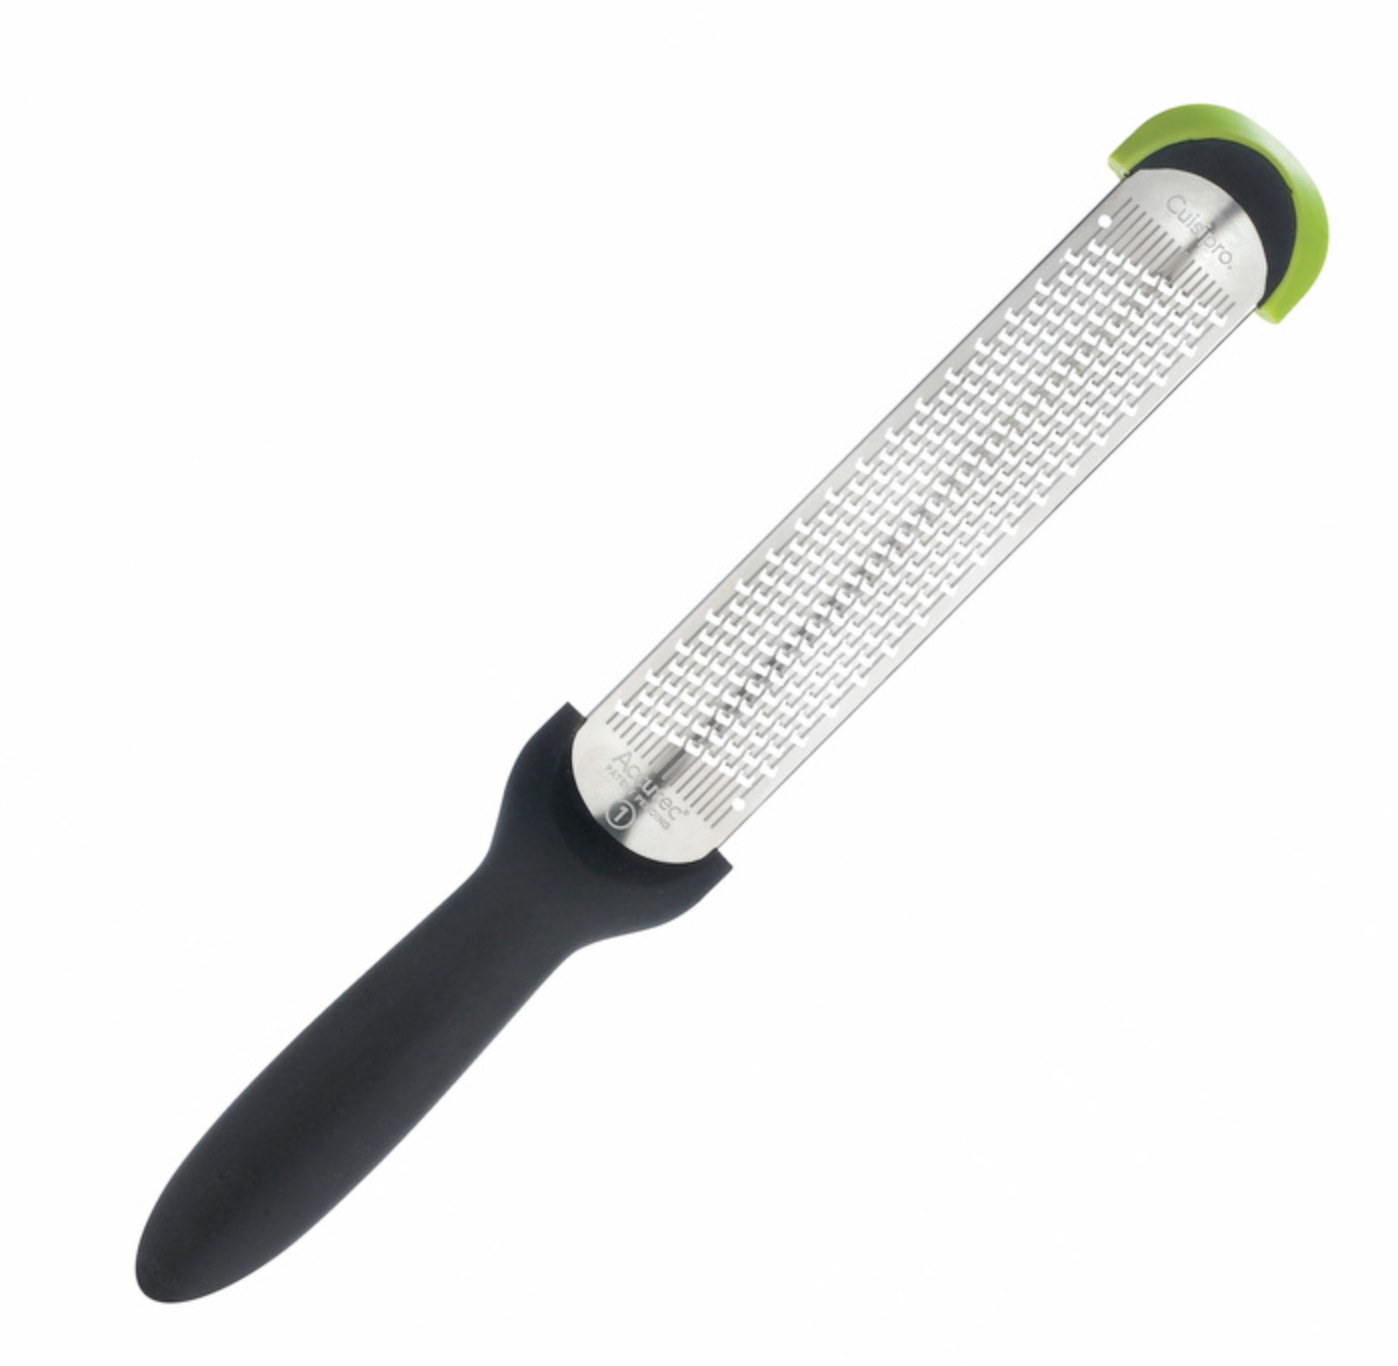 Zyliss Classic Cheese Grater - MyToque